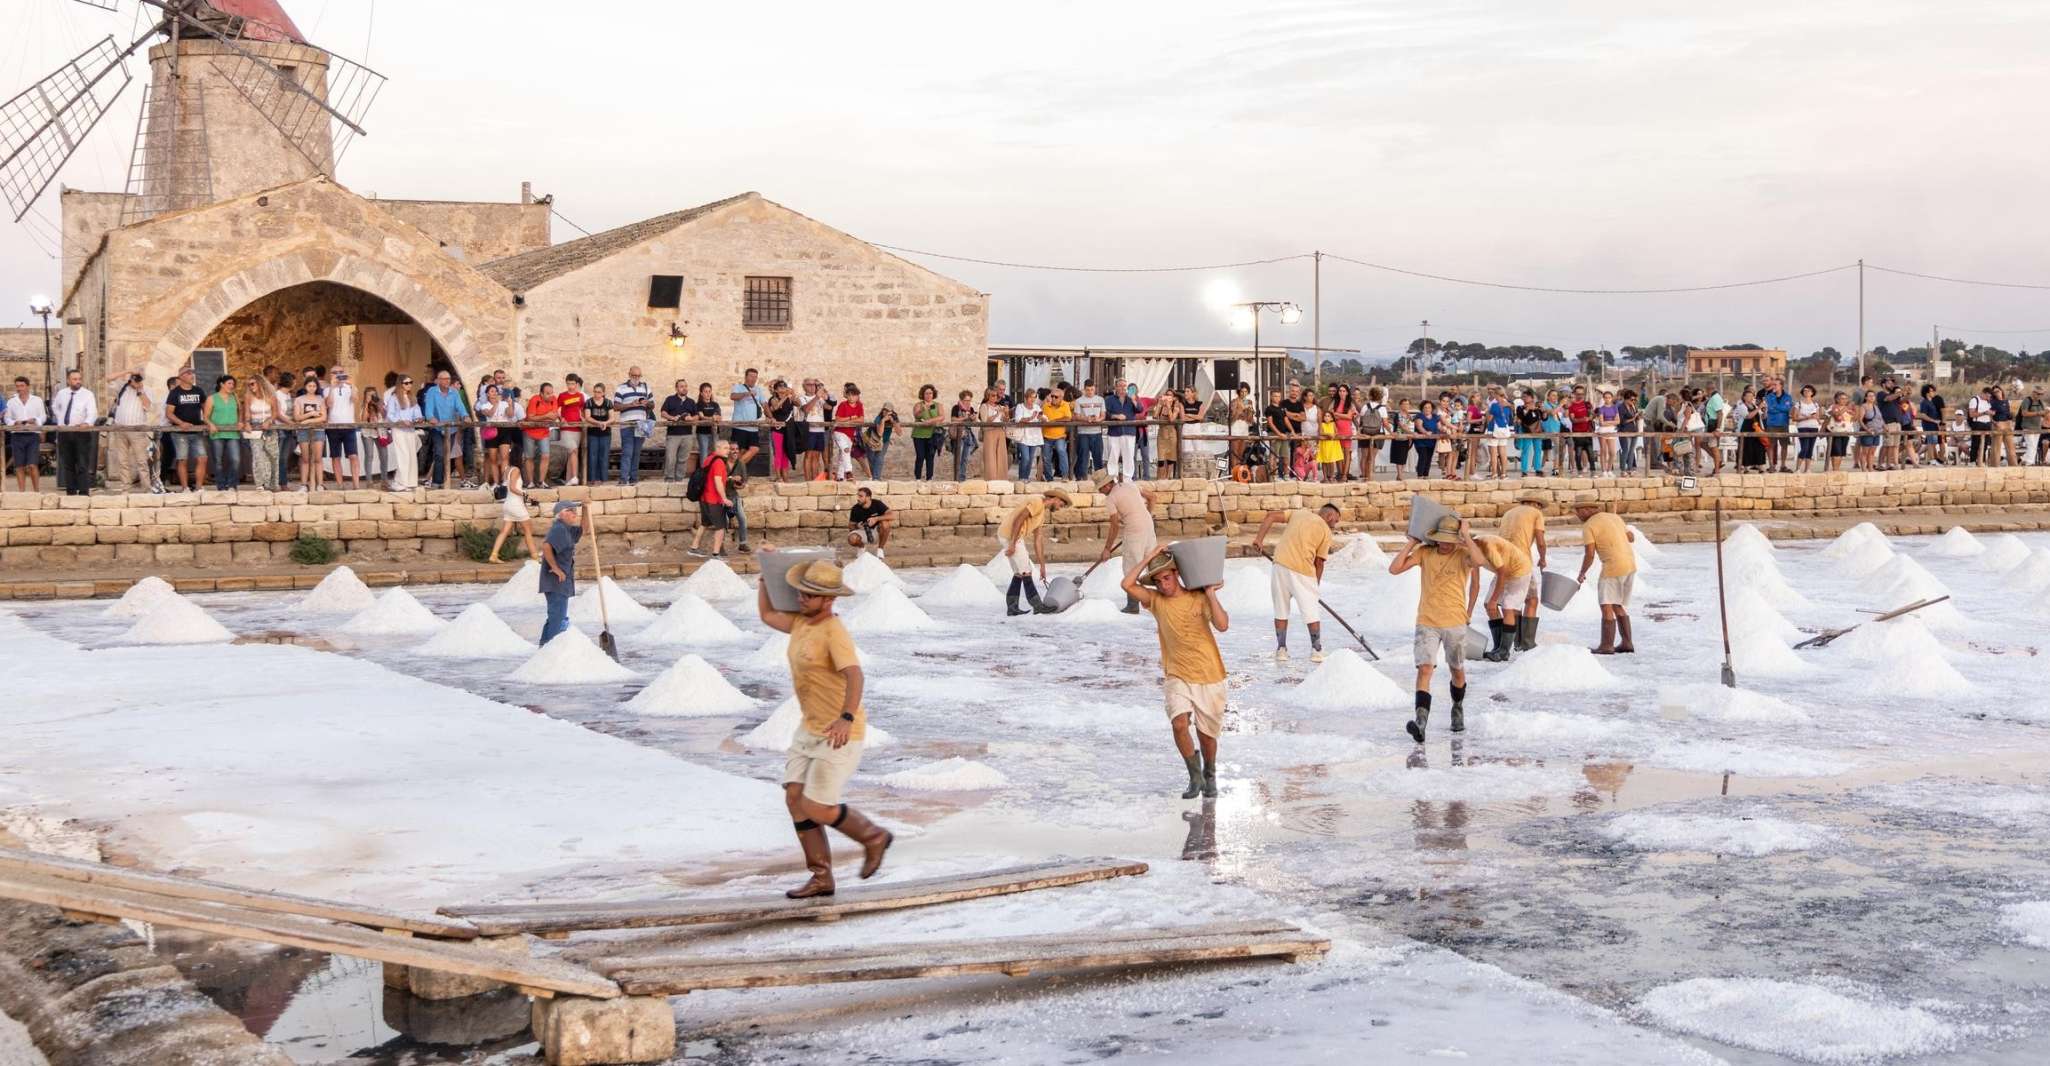 Trapani, guided tour of the salt pans and salt museum - Housity